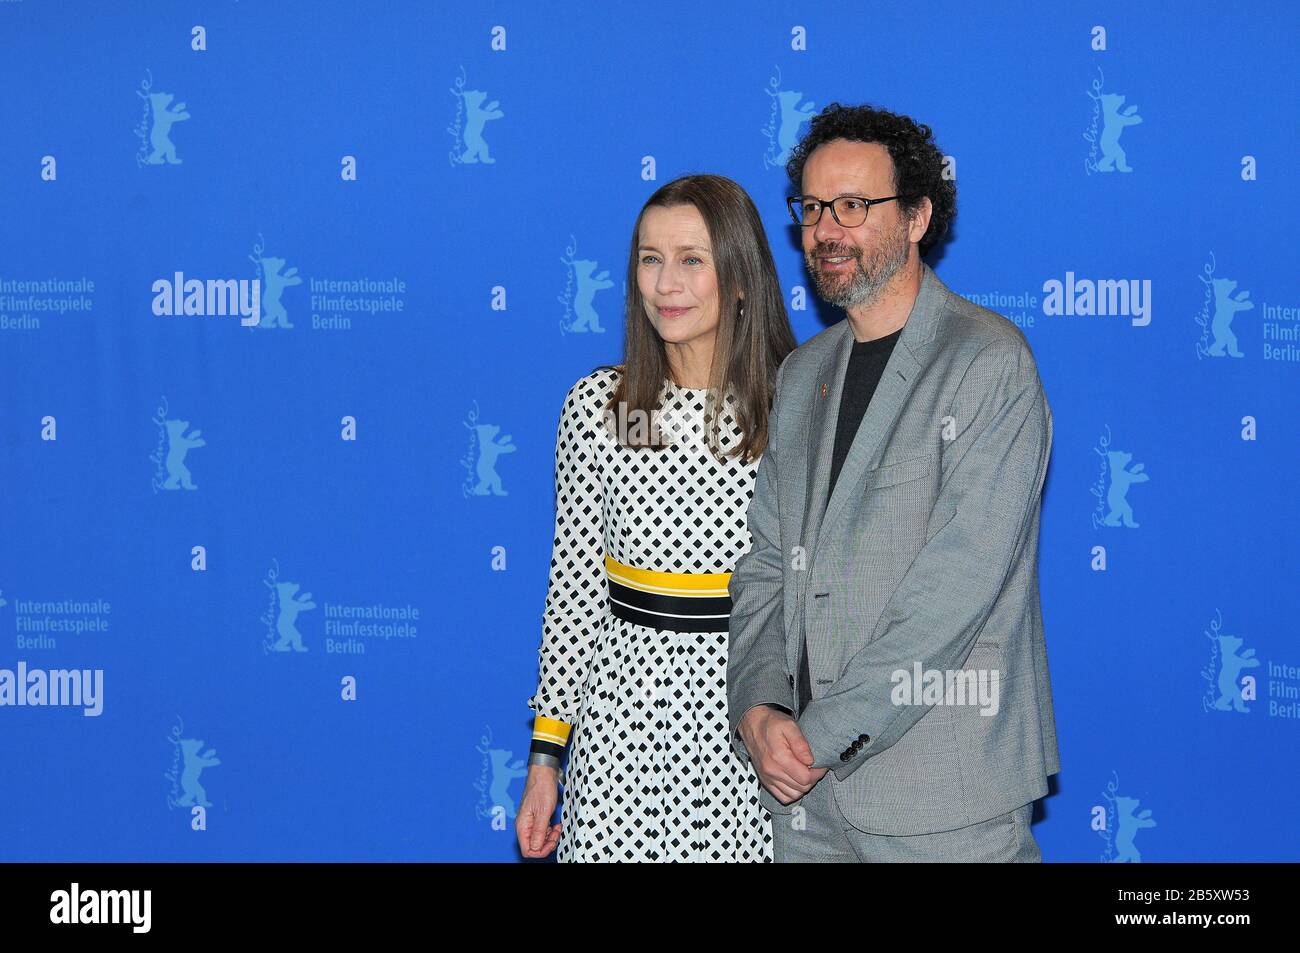 February 23rd, 2020  Festival Directors photocall and press conference during the Berlinale Film Festival 2020. Stock Photo